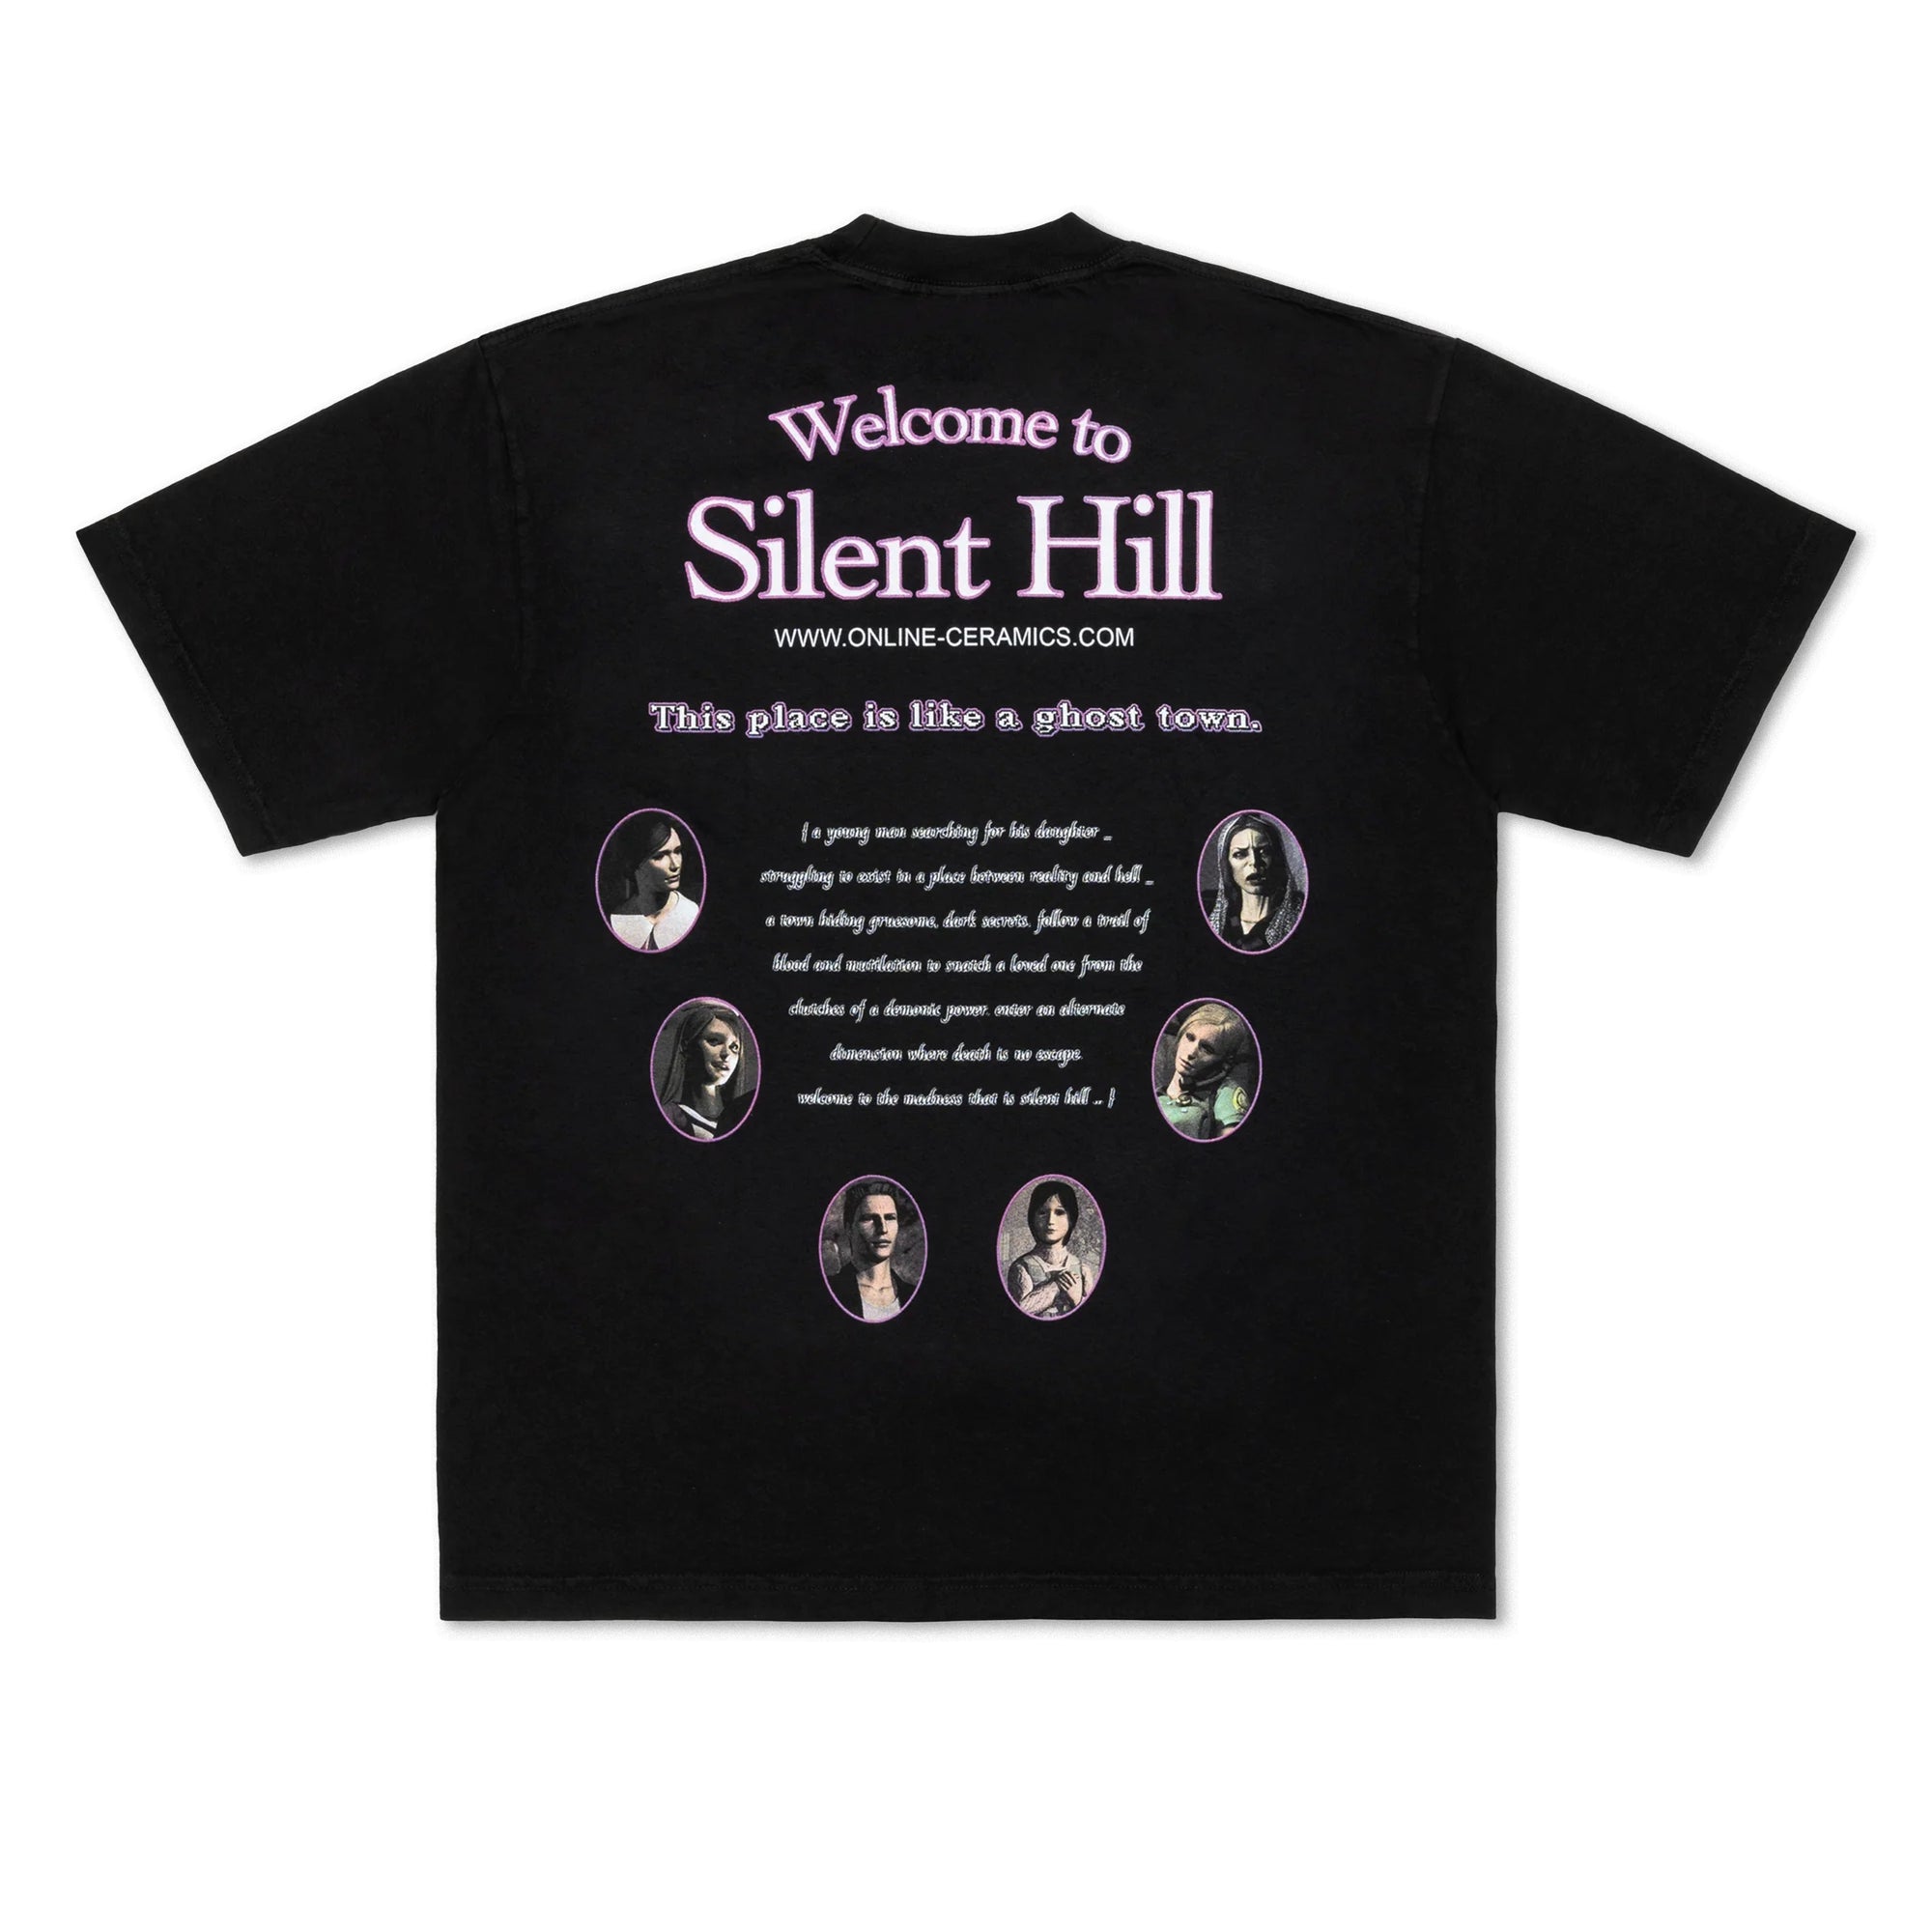 Online Ceramics - Men's Welcome To Silent Hill Tee - (Black) view 2